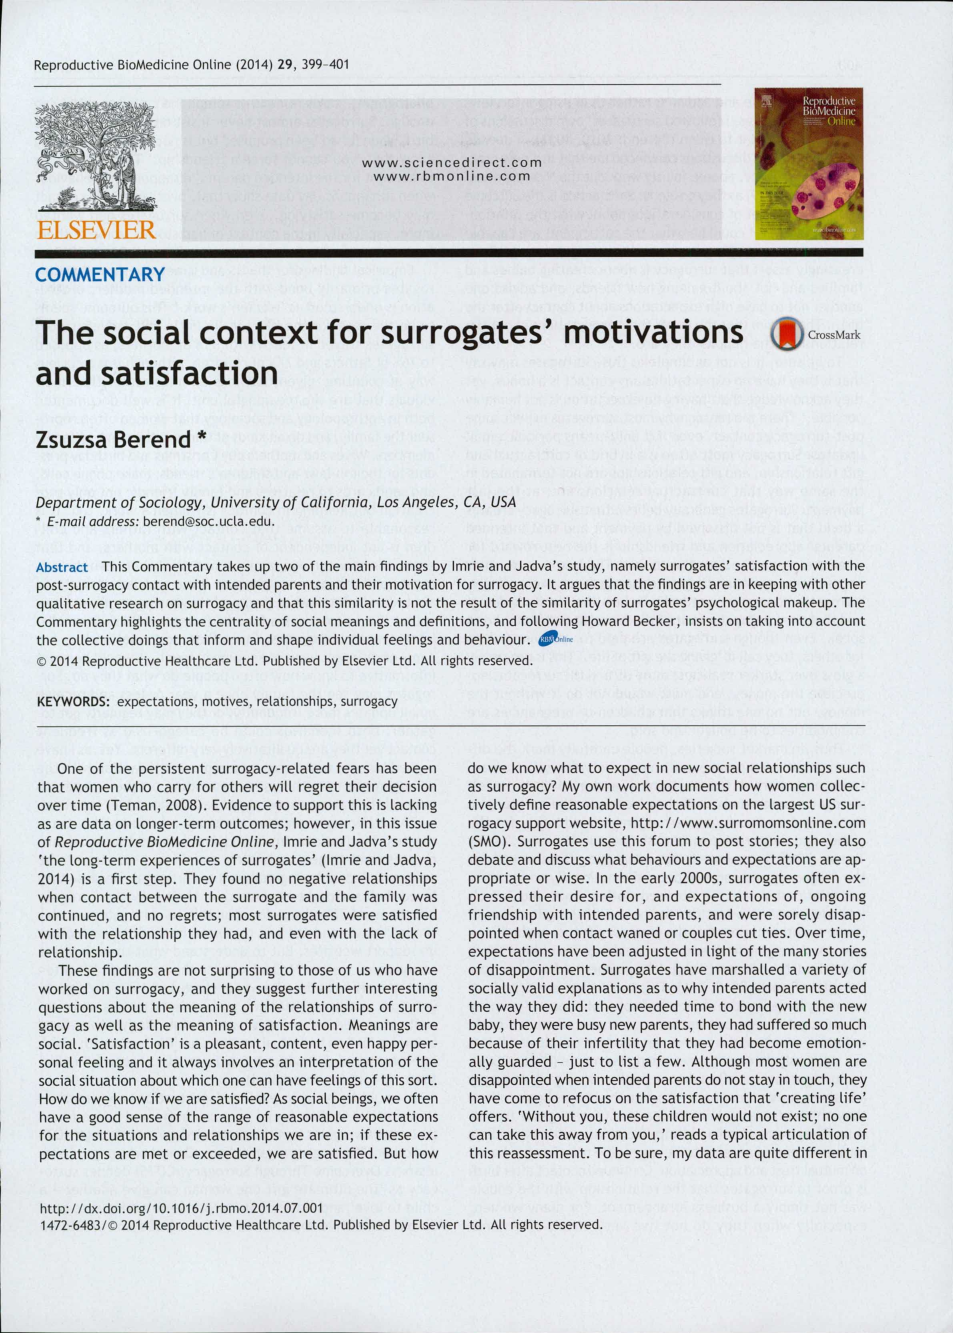 The social context for surrogates' motivations and satisfaction